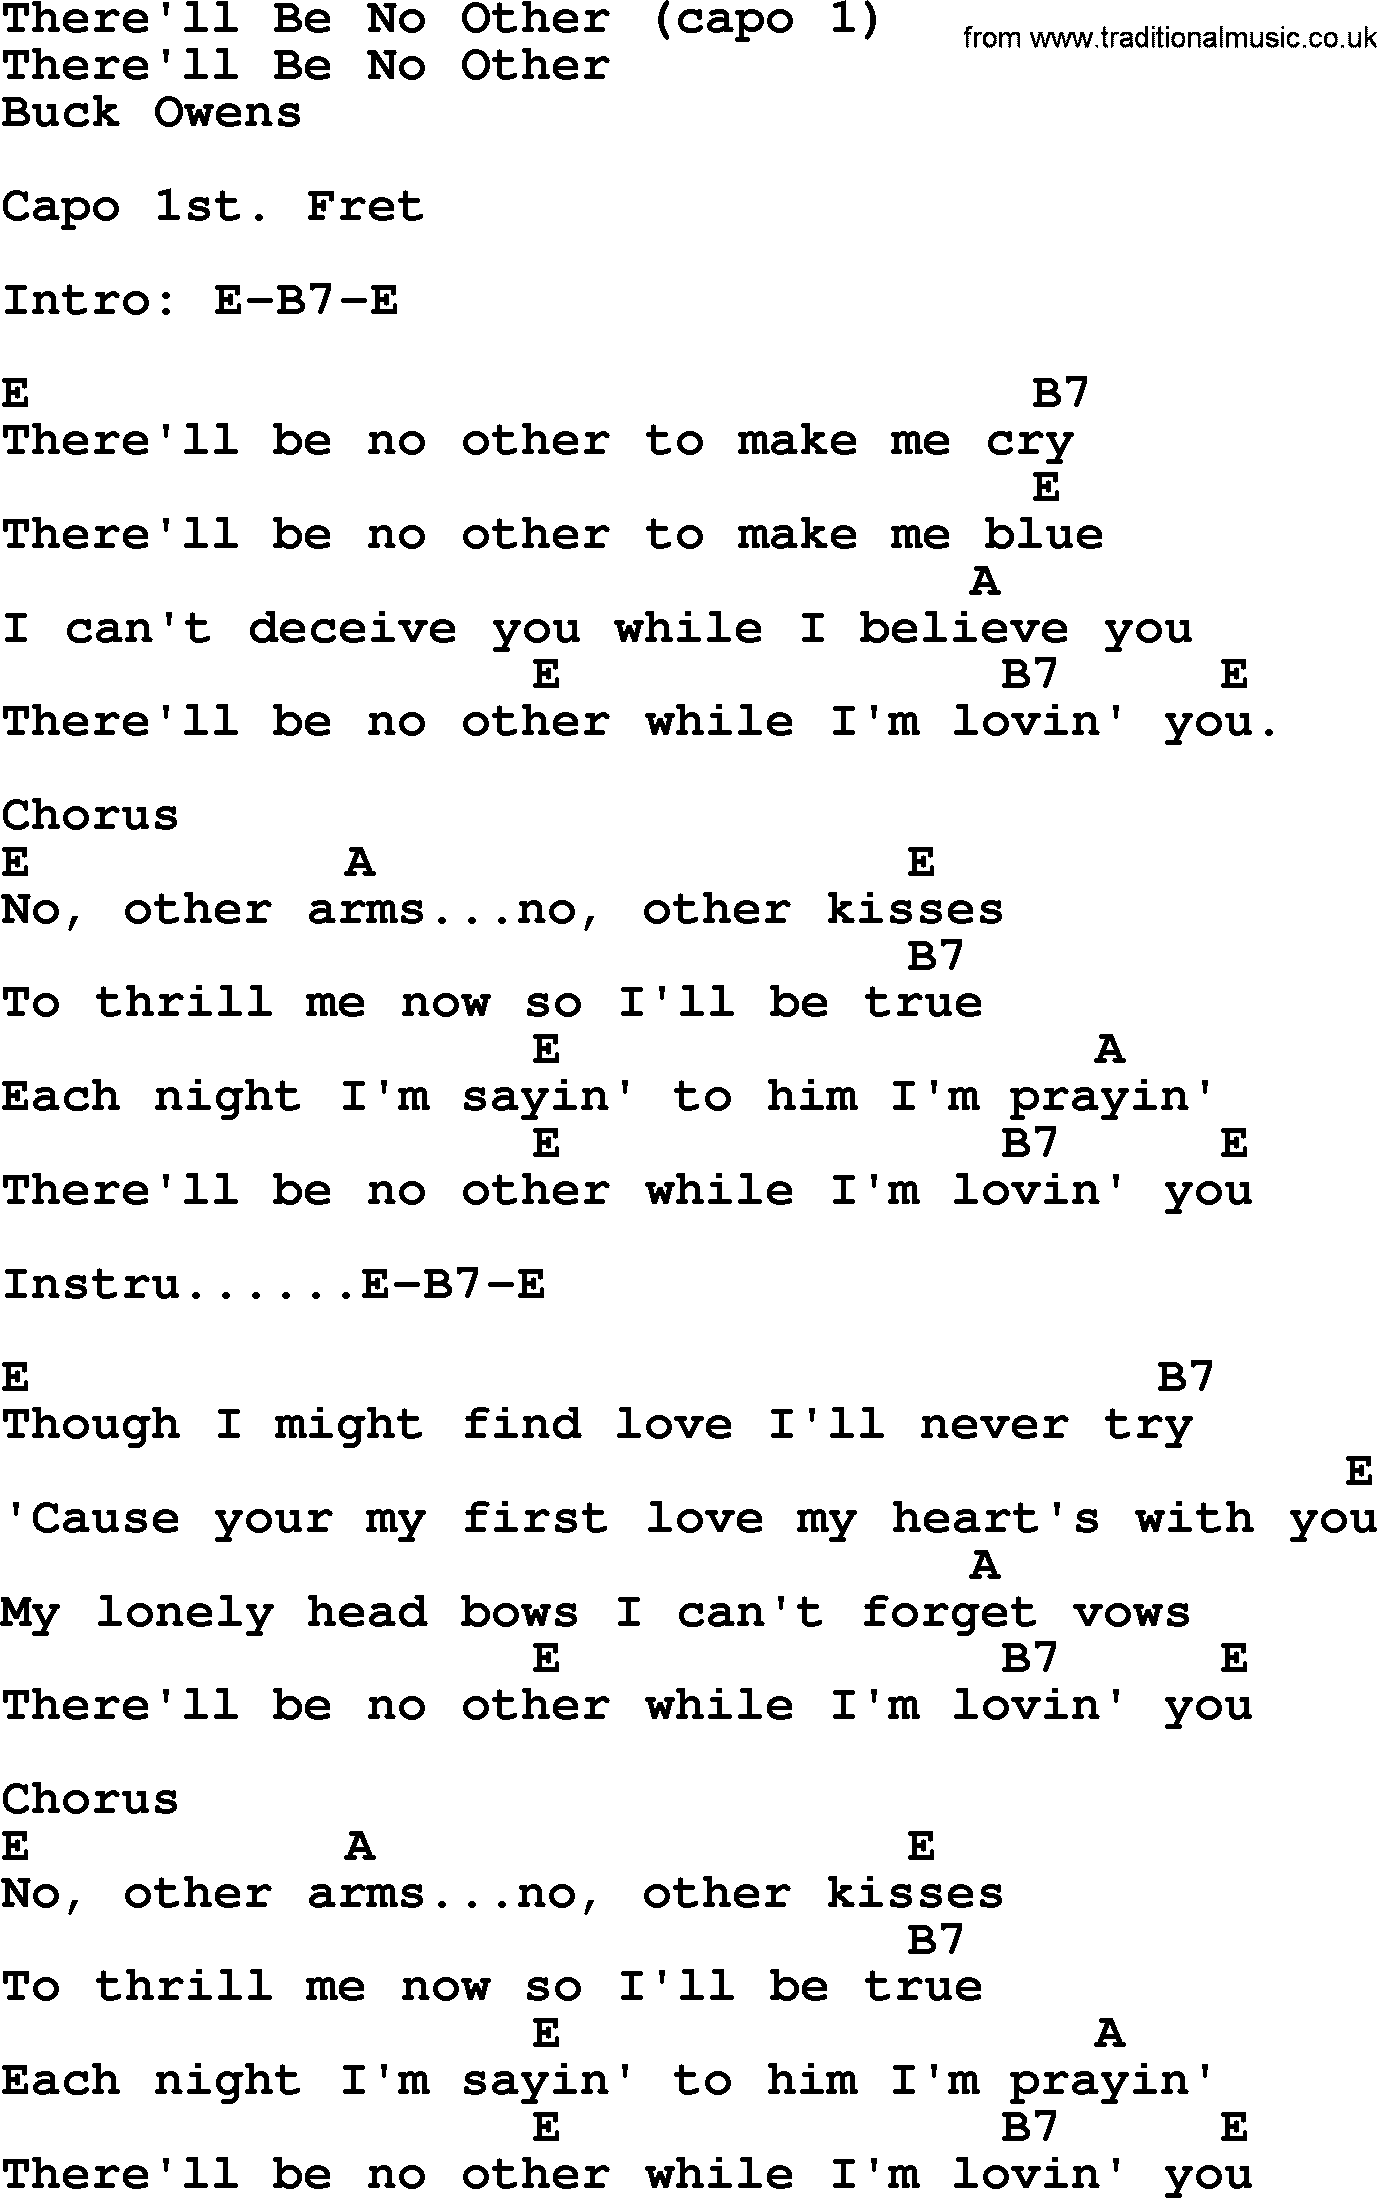 Bluegrass song: There'll Be No Other (Capo 1), lyrics and chords